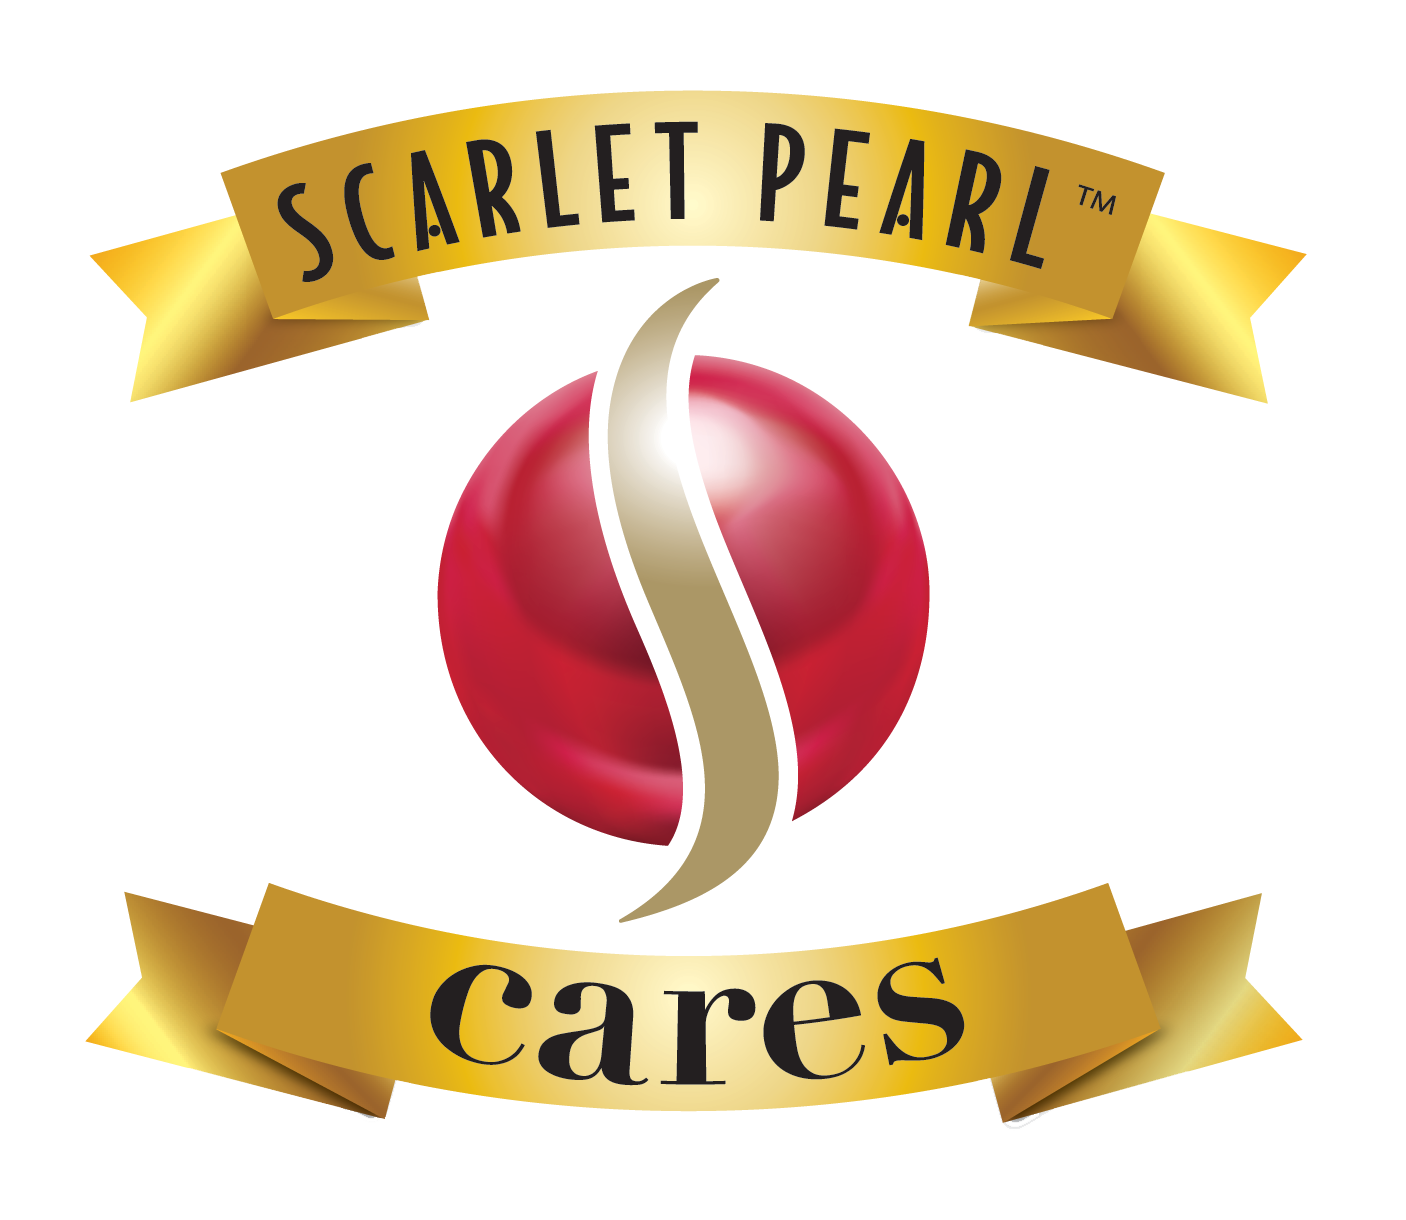 D. Scarlet Pearl Casino (Support)